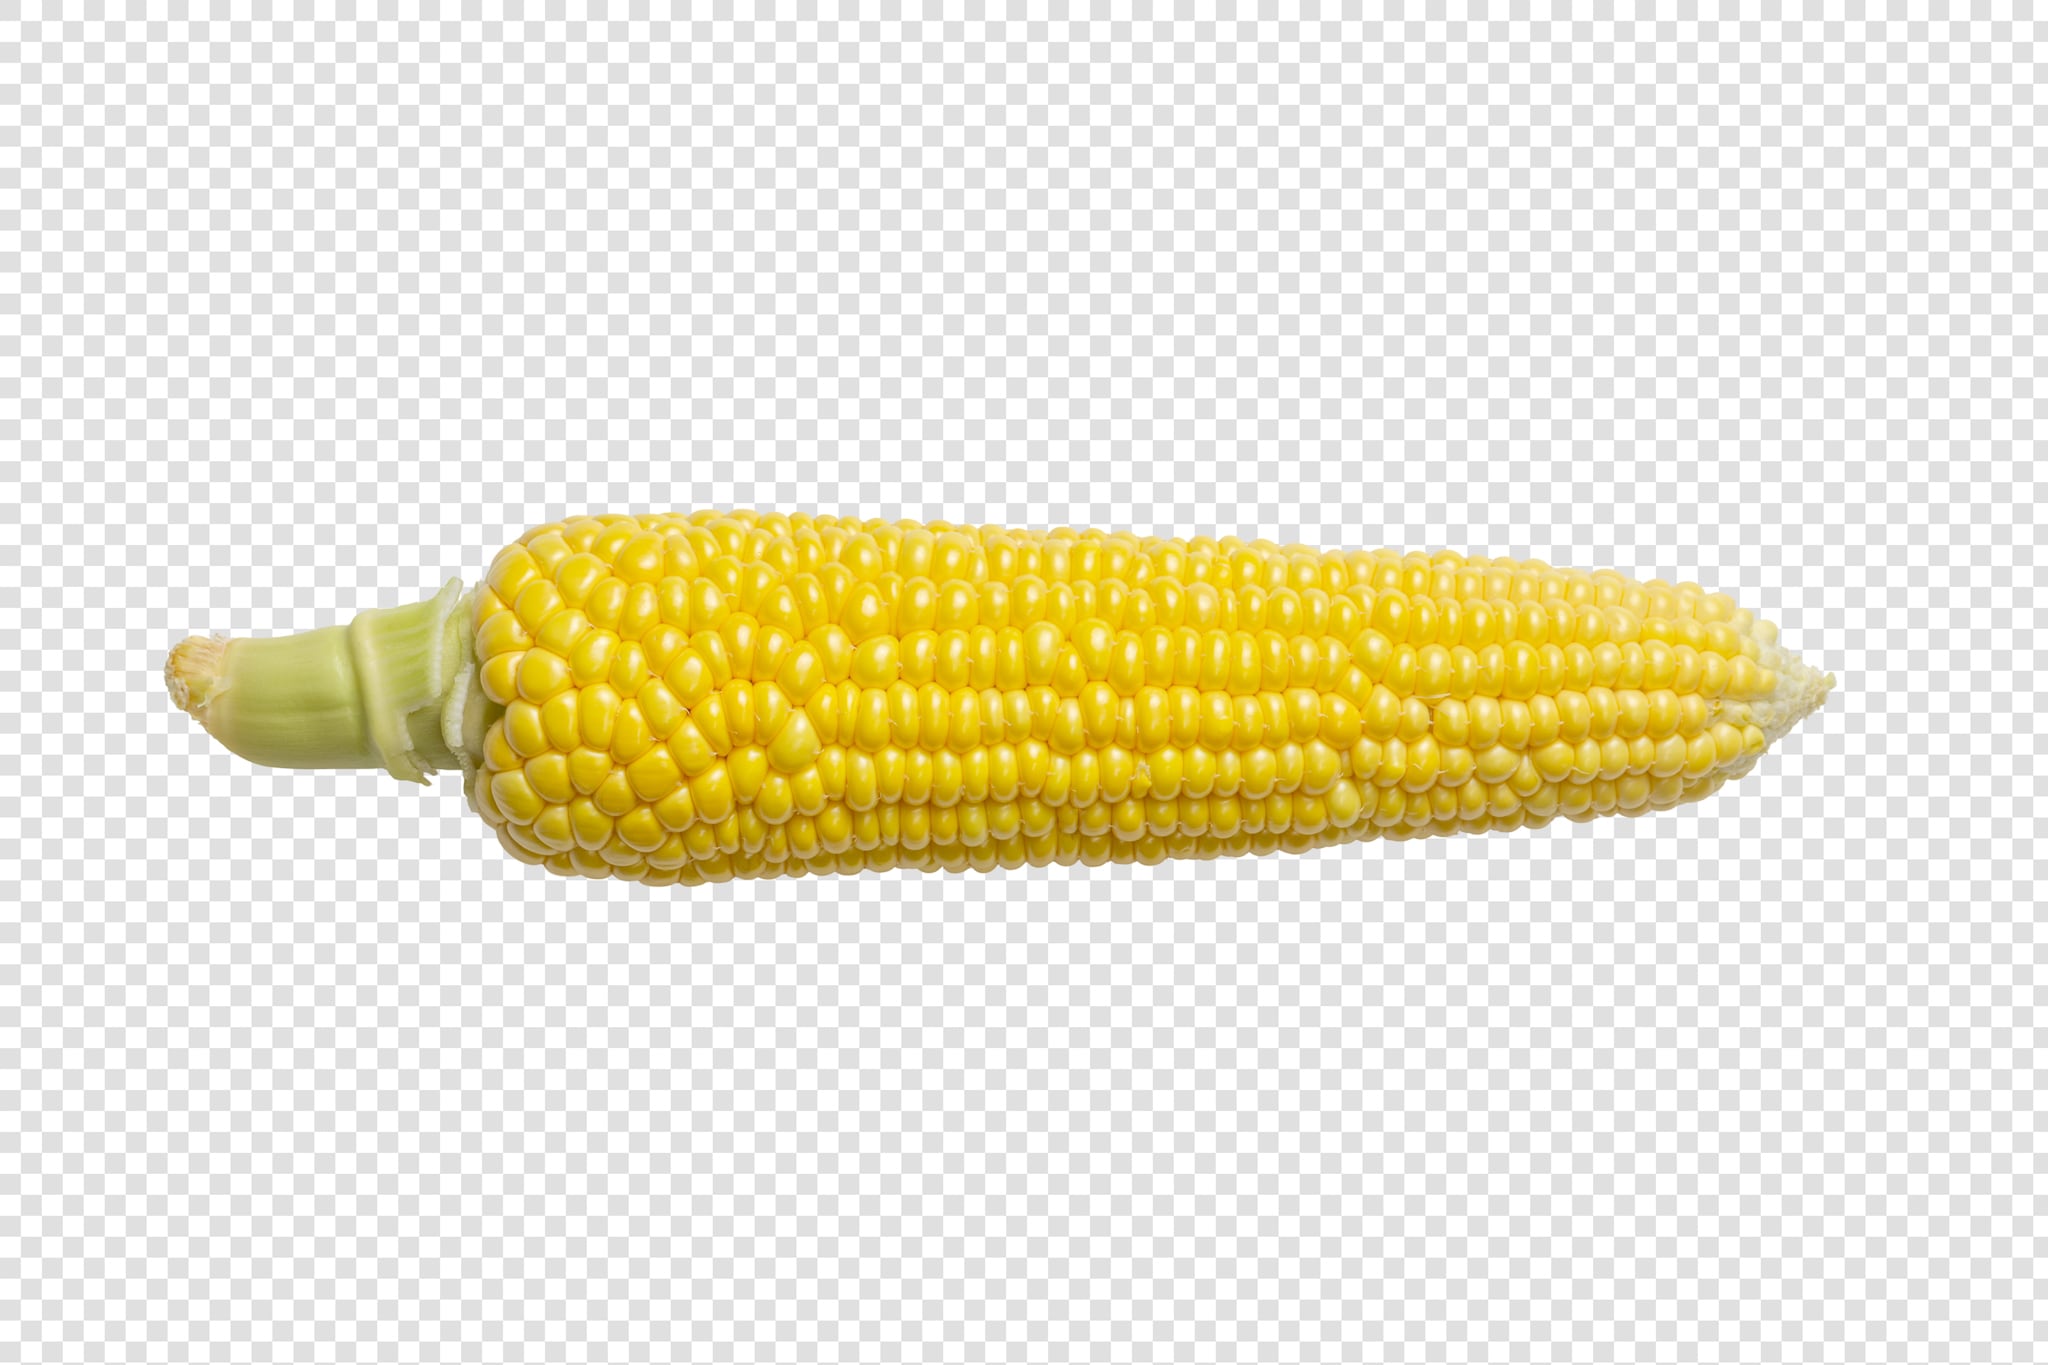 Isolated Ear of corn psd image